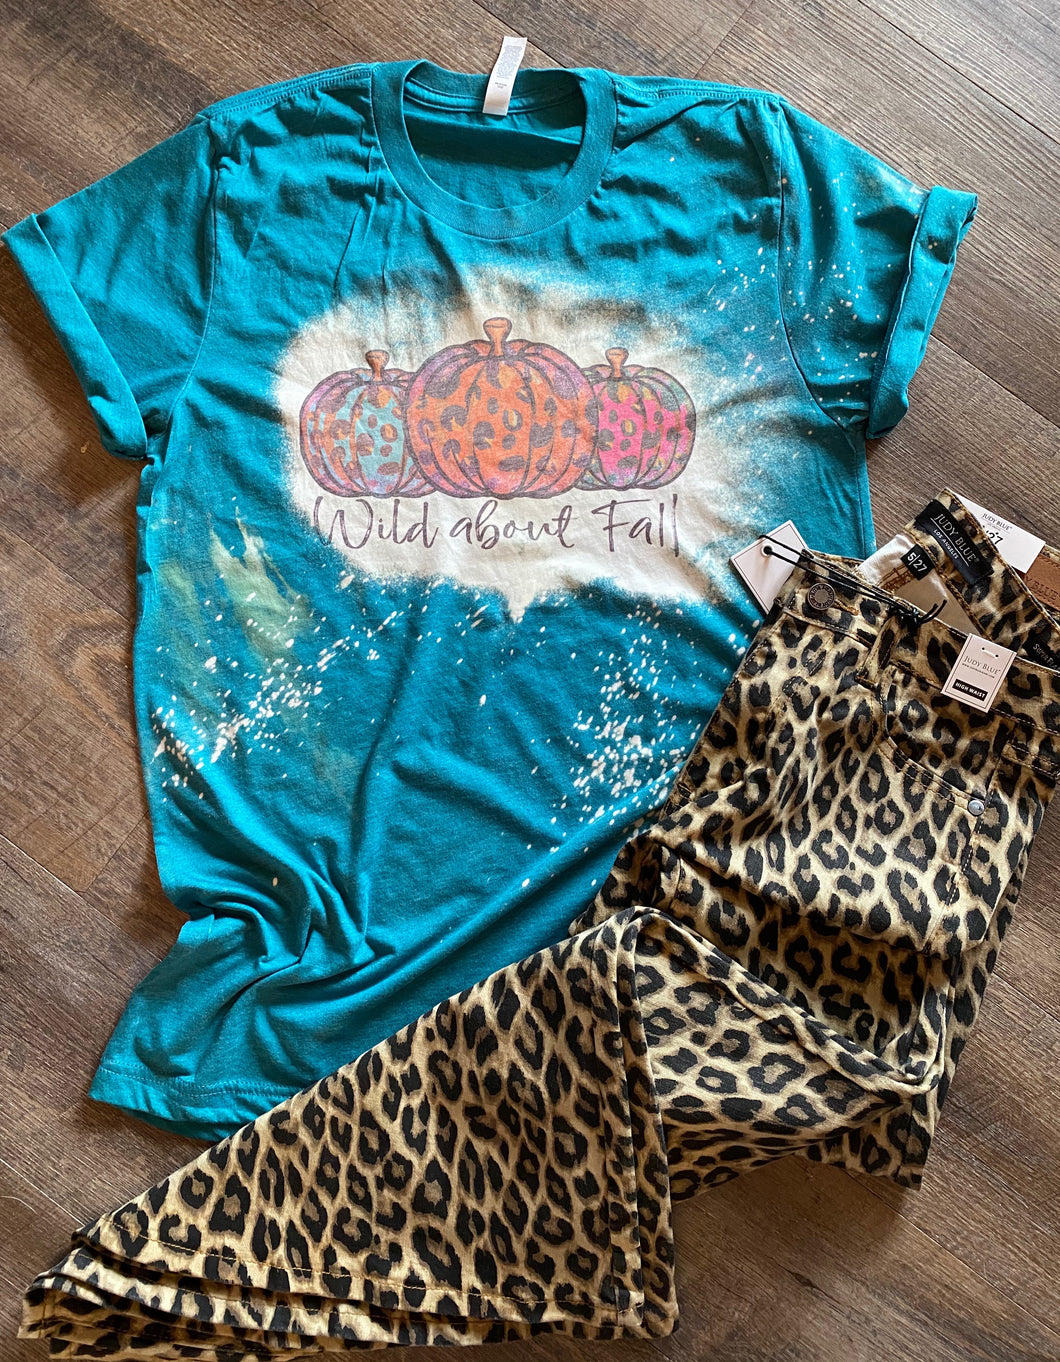 Wild About Fall / graphic hoodie tee crew or long sleeve - Mavictoria Designs Hot Press Express